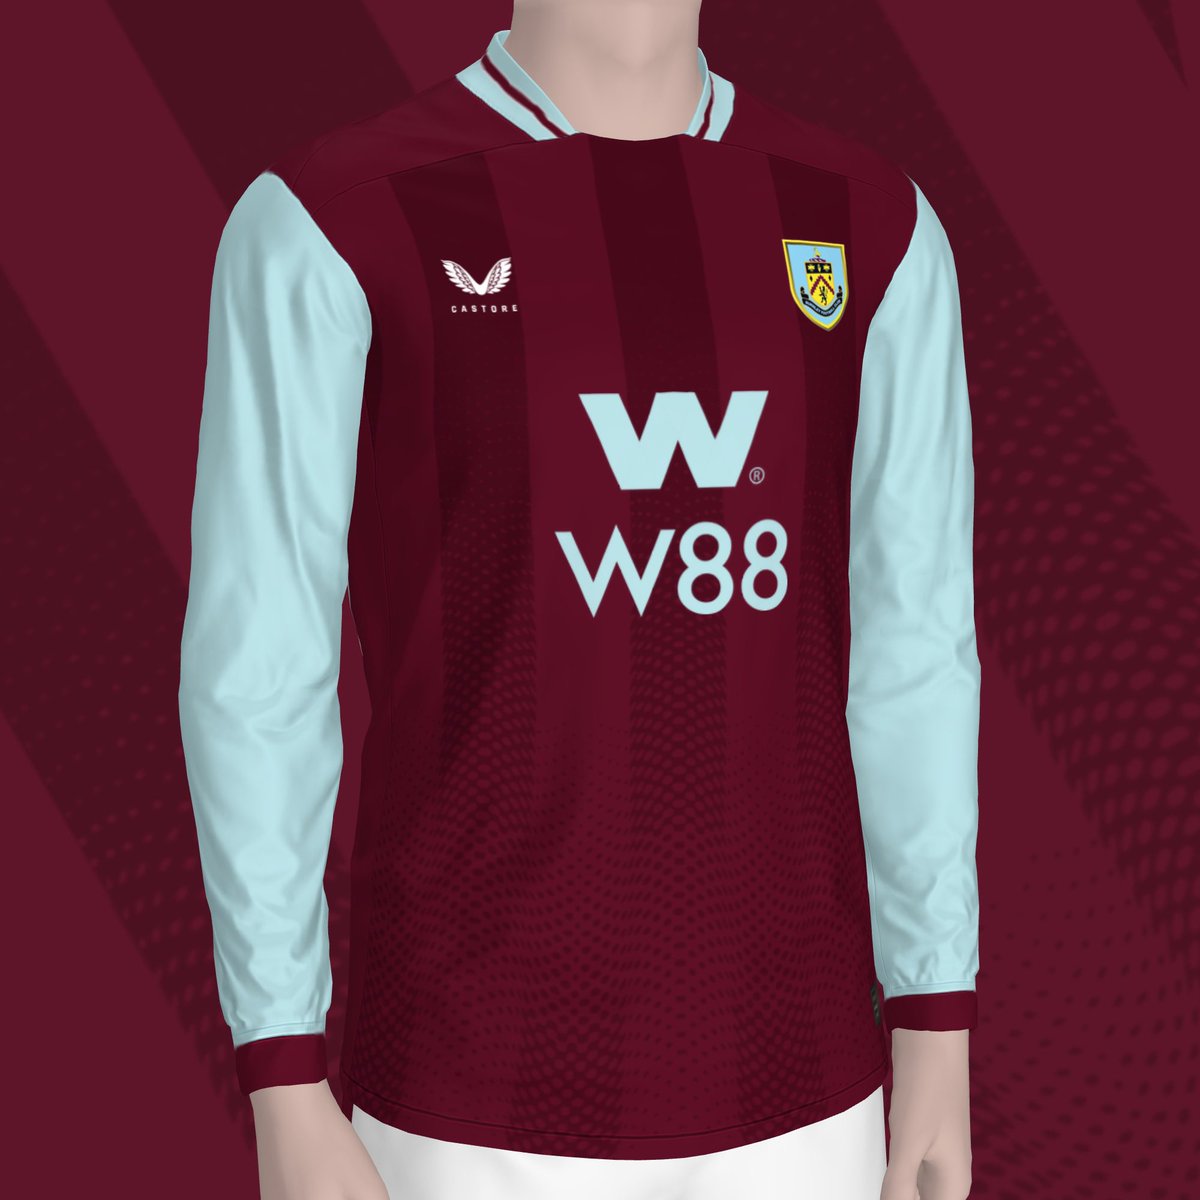 Quick idea for a possible 24/25 Home Kit. 

#twitterclarets